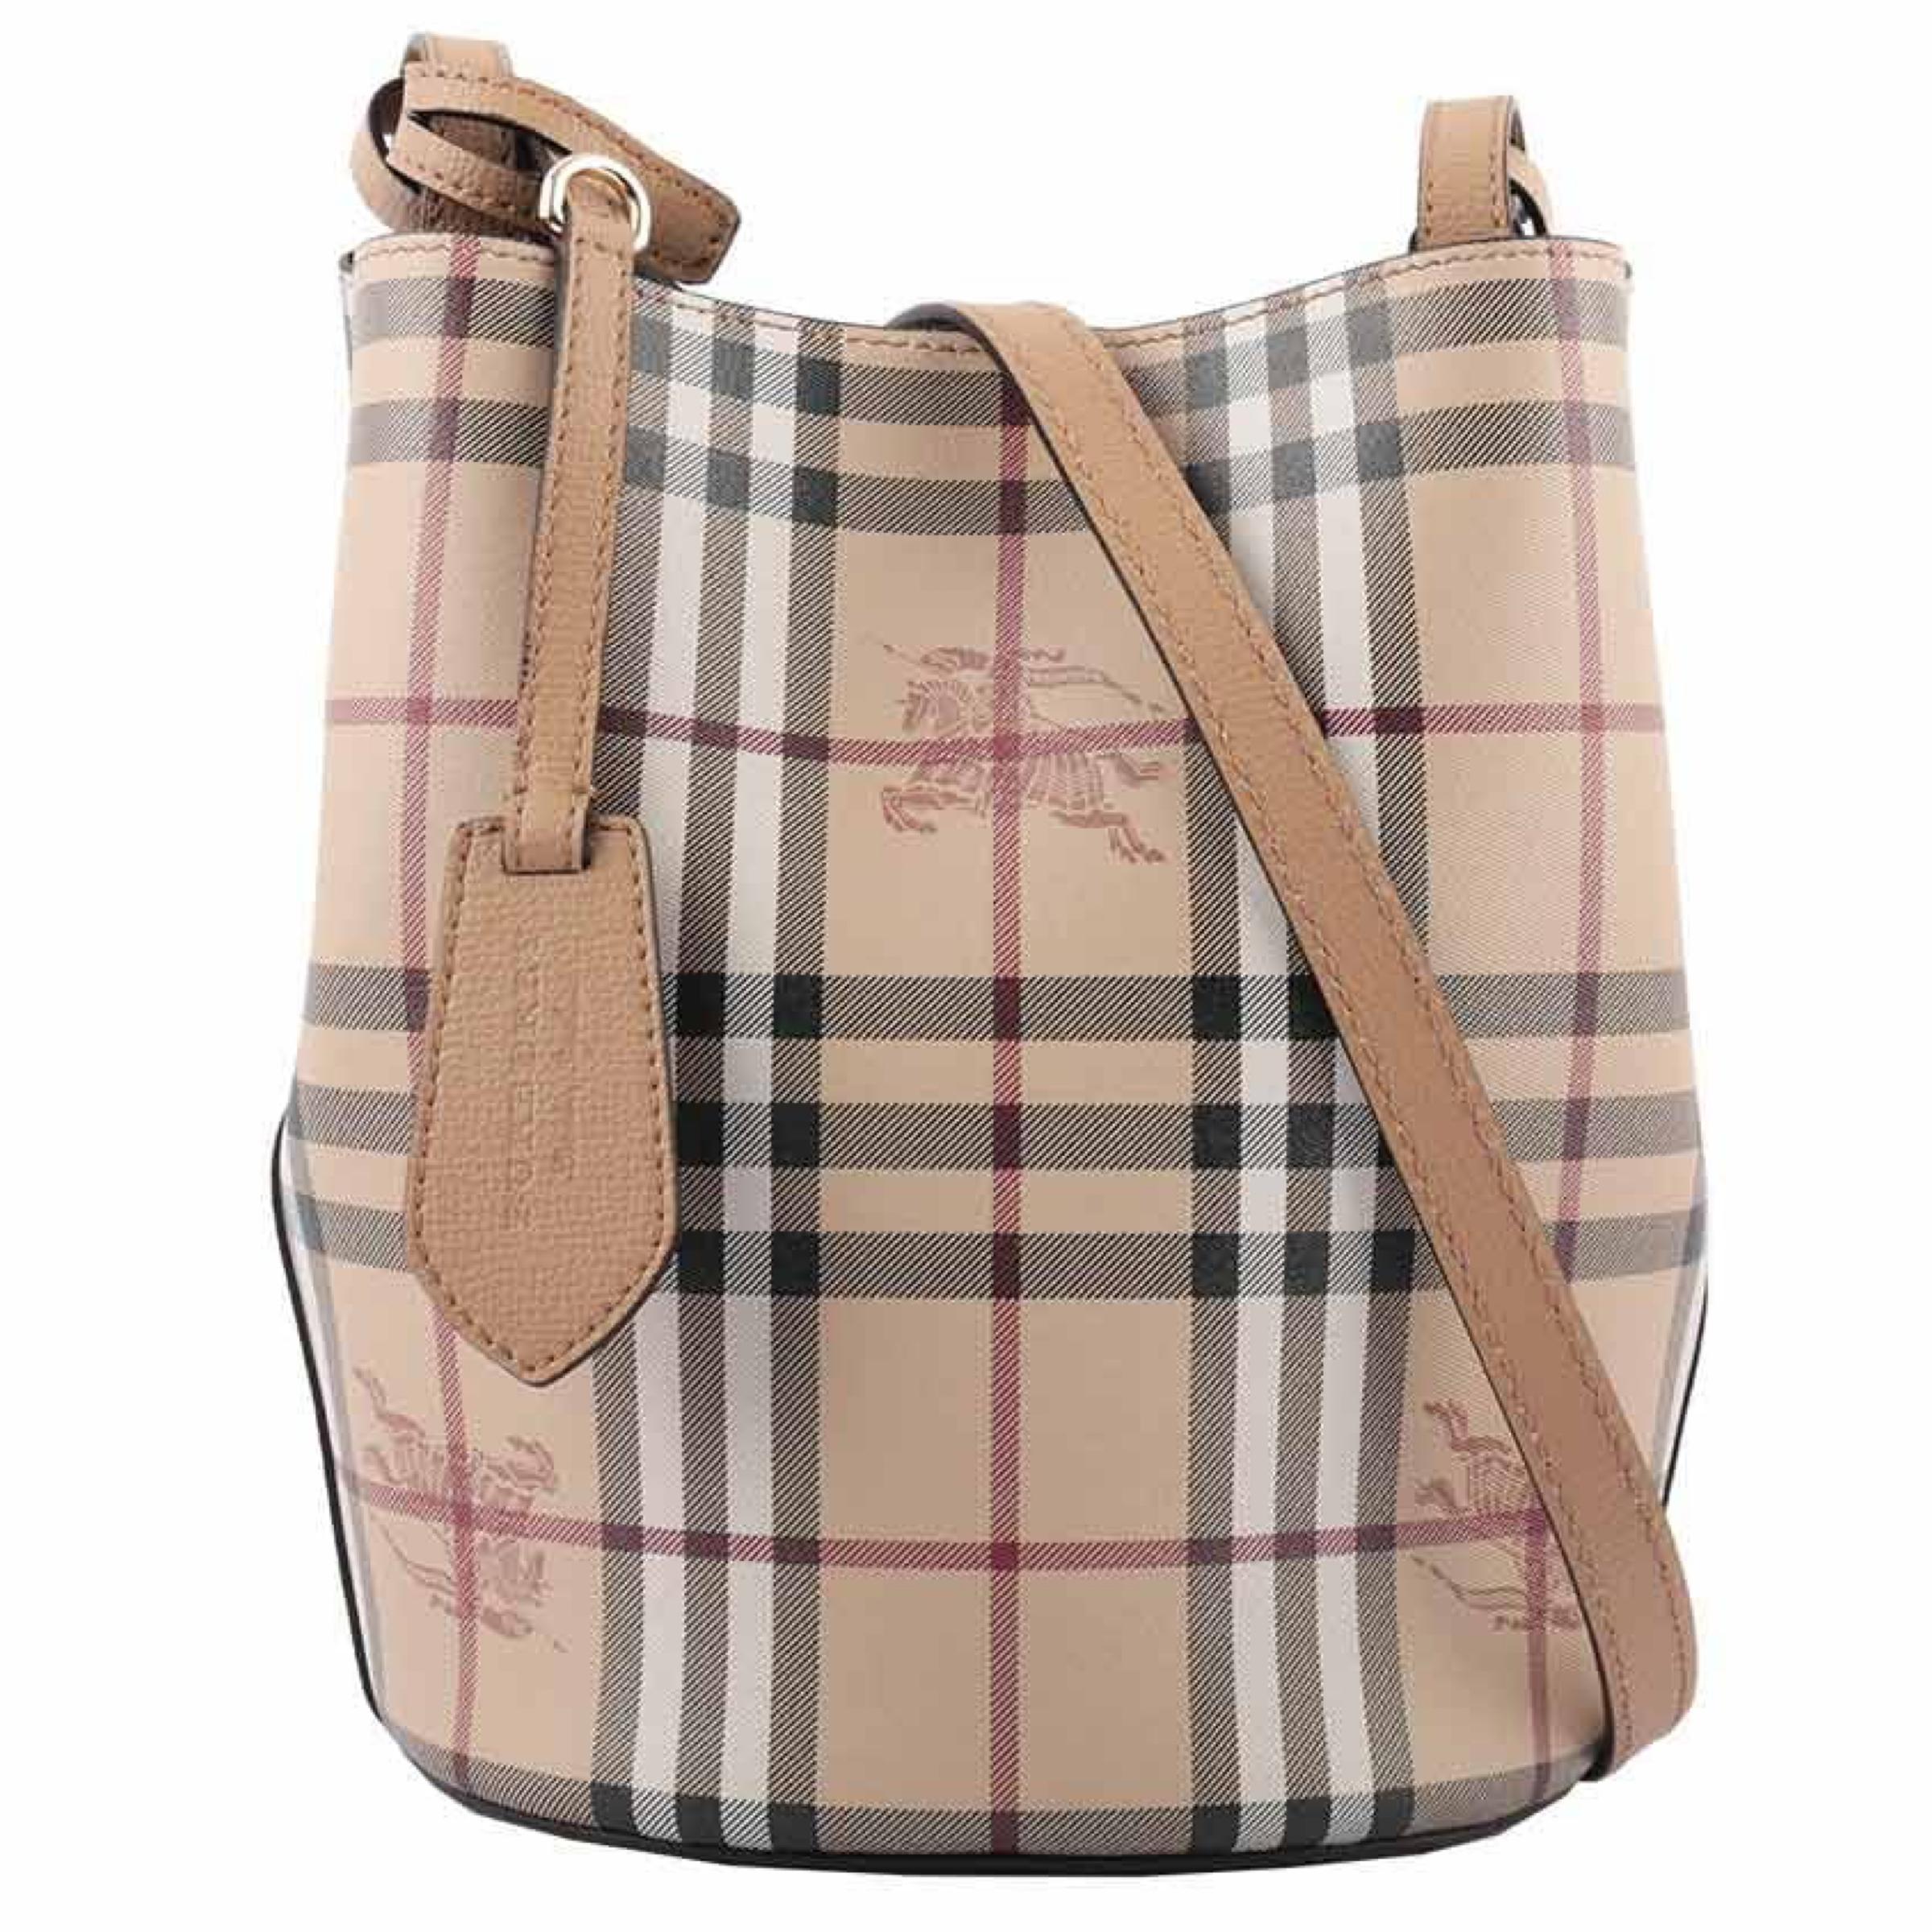 New Burberry Beige/Brown Haymarket Check Leather Bucket Crossbody Bag

Authenticity Guaranteed

DETAILS
Brand: Burberry
Condition: Brand new
Gender: Women
Category: Crossbody bag
Color: Beige/brown
Material: Leather
Check pattern details
Gold-tone